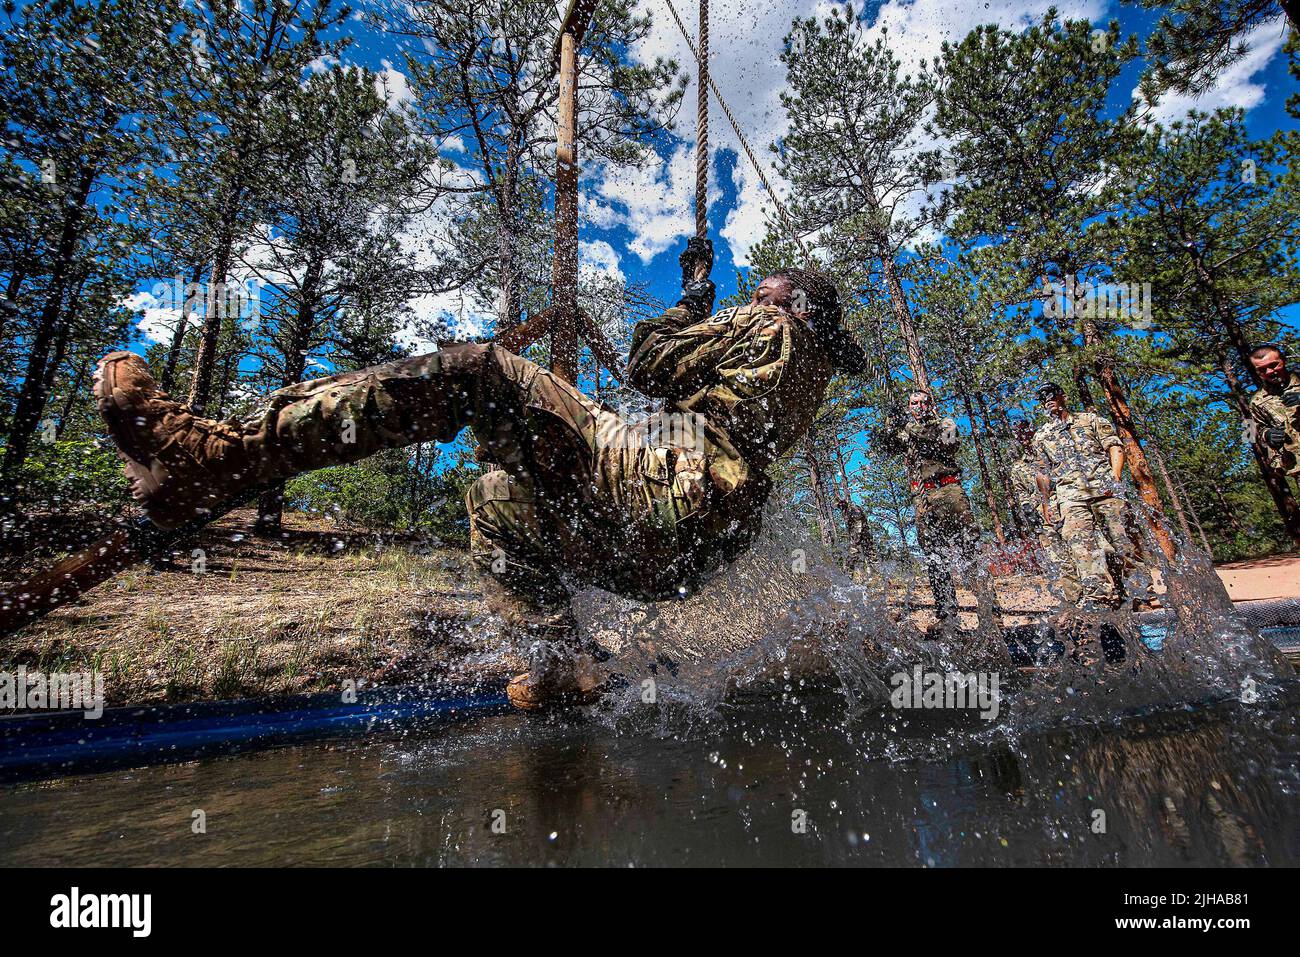 Colorado Springs, Colorado, USA. 13th July, 2022. Basic Cadets from the Class of 2026 complete the obstacle course at the U.S. Air Force Academy's Jacks Valley in Colorado Springs, Colo., on July 13, 2022. Basic Cadet Training (BCT) is a six-week indoctrination program to guide the transformation of new cadets from being civilians to military academy cadets prepared to enter a four-year officer commissioning program. Credit: U.S. Air Force/ZUMA Press Wire Service/ZUMAPRESS.com/Alamy Live News Stock Photo